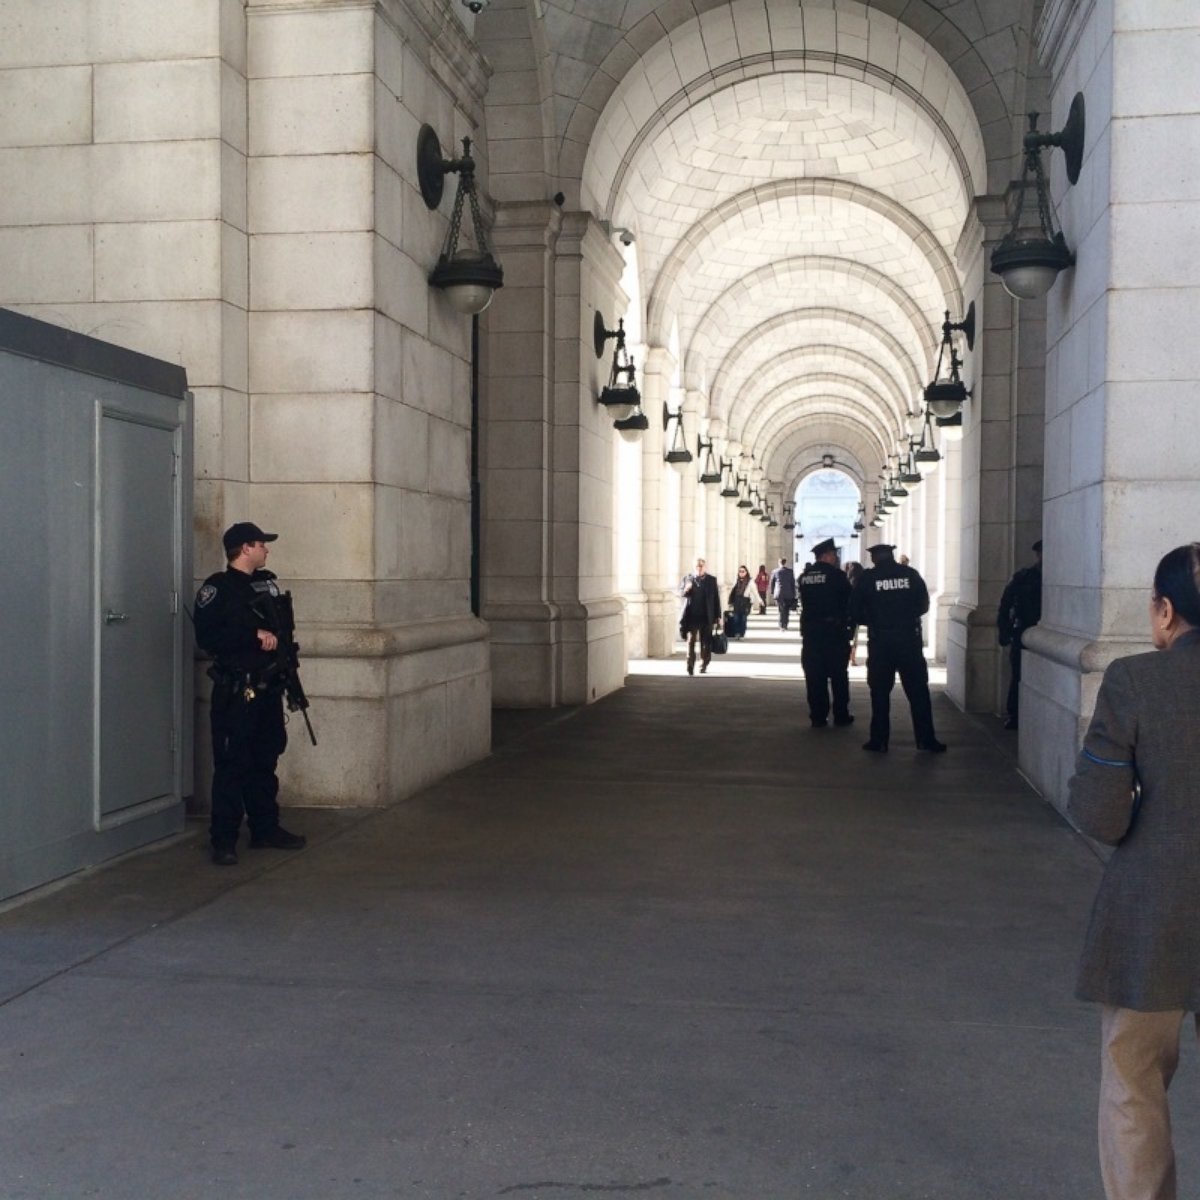 PHOTO: Officers were on guard at Union Station in Washington, D.C., Nov. 16, 2015.